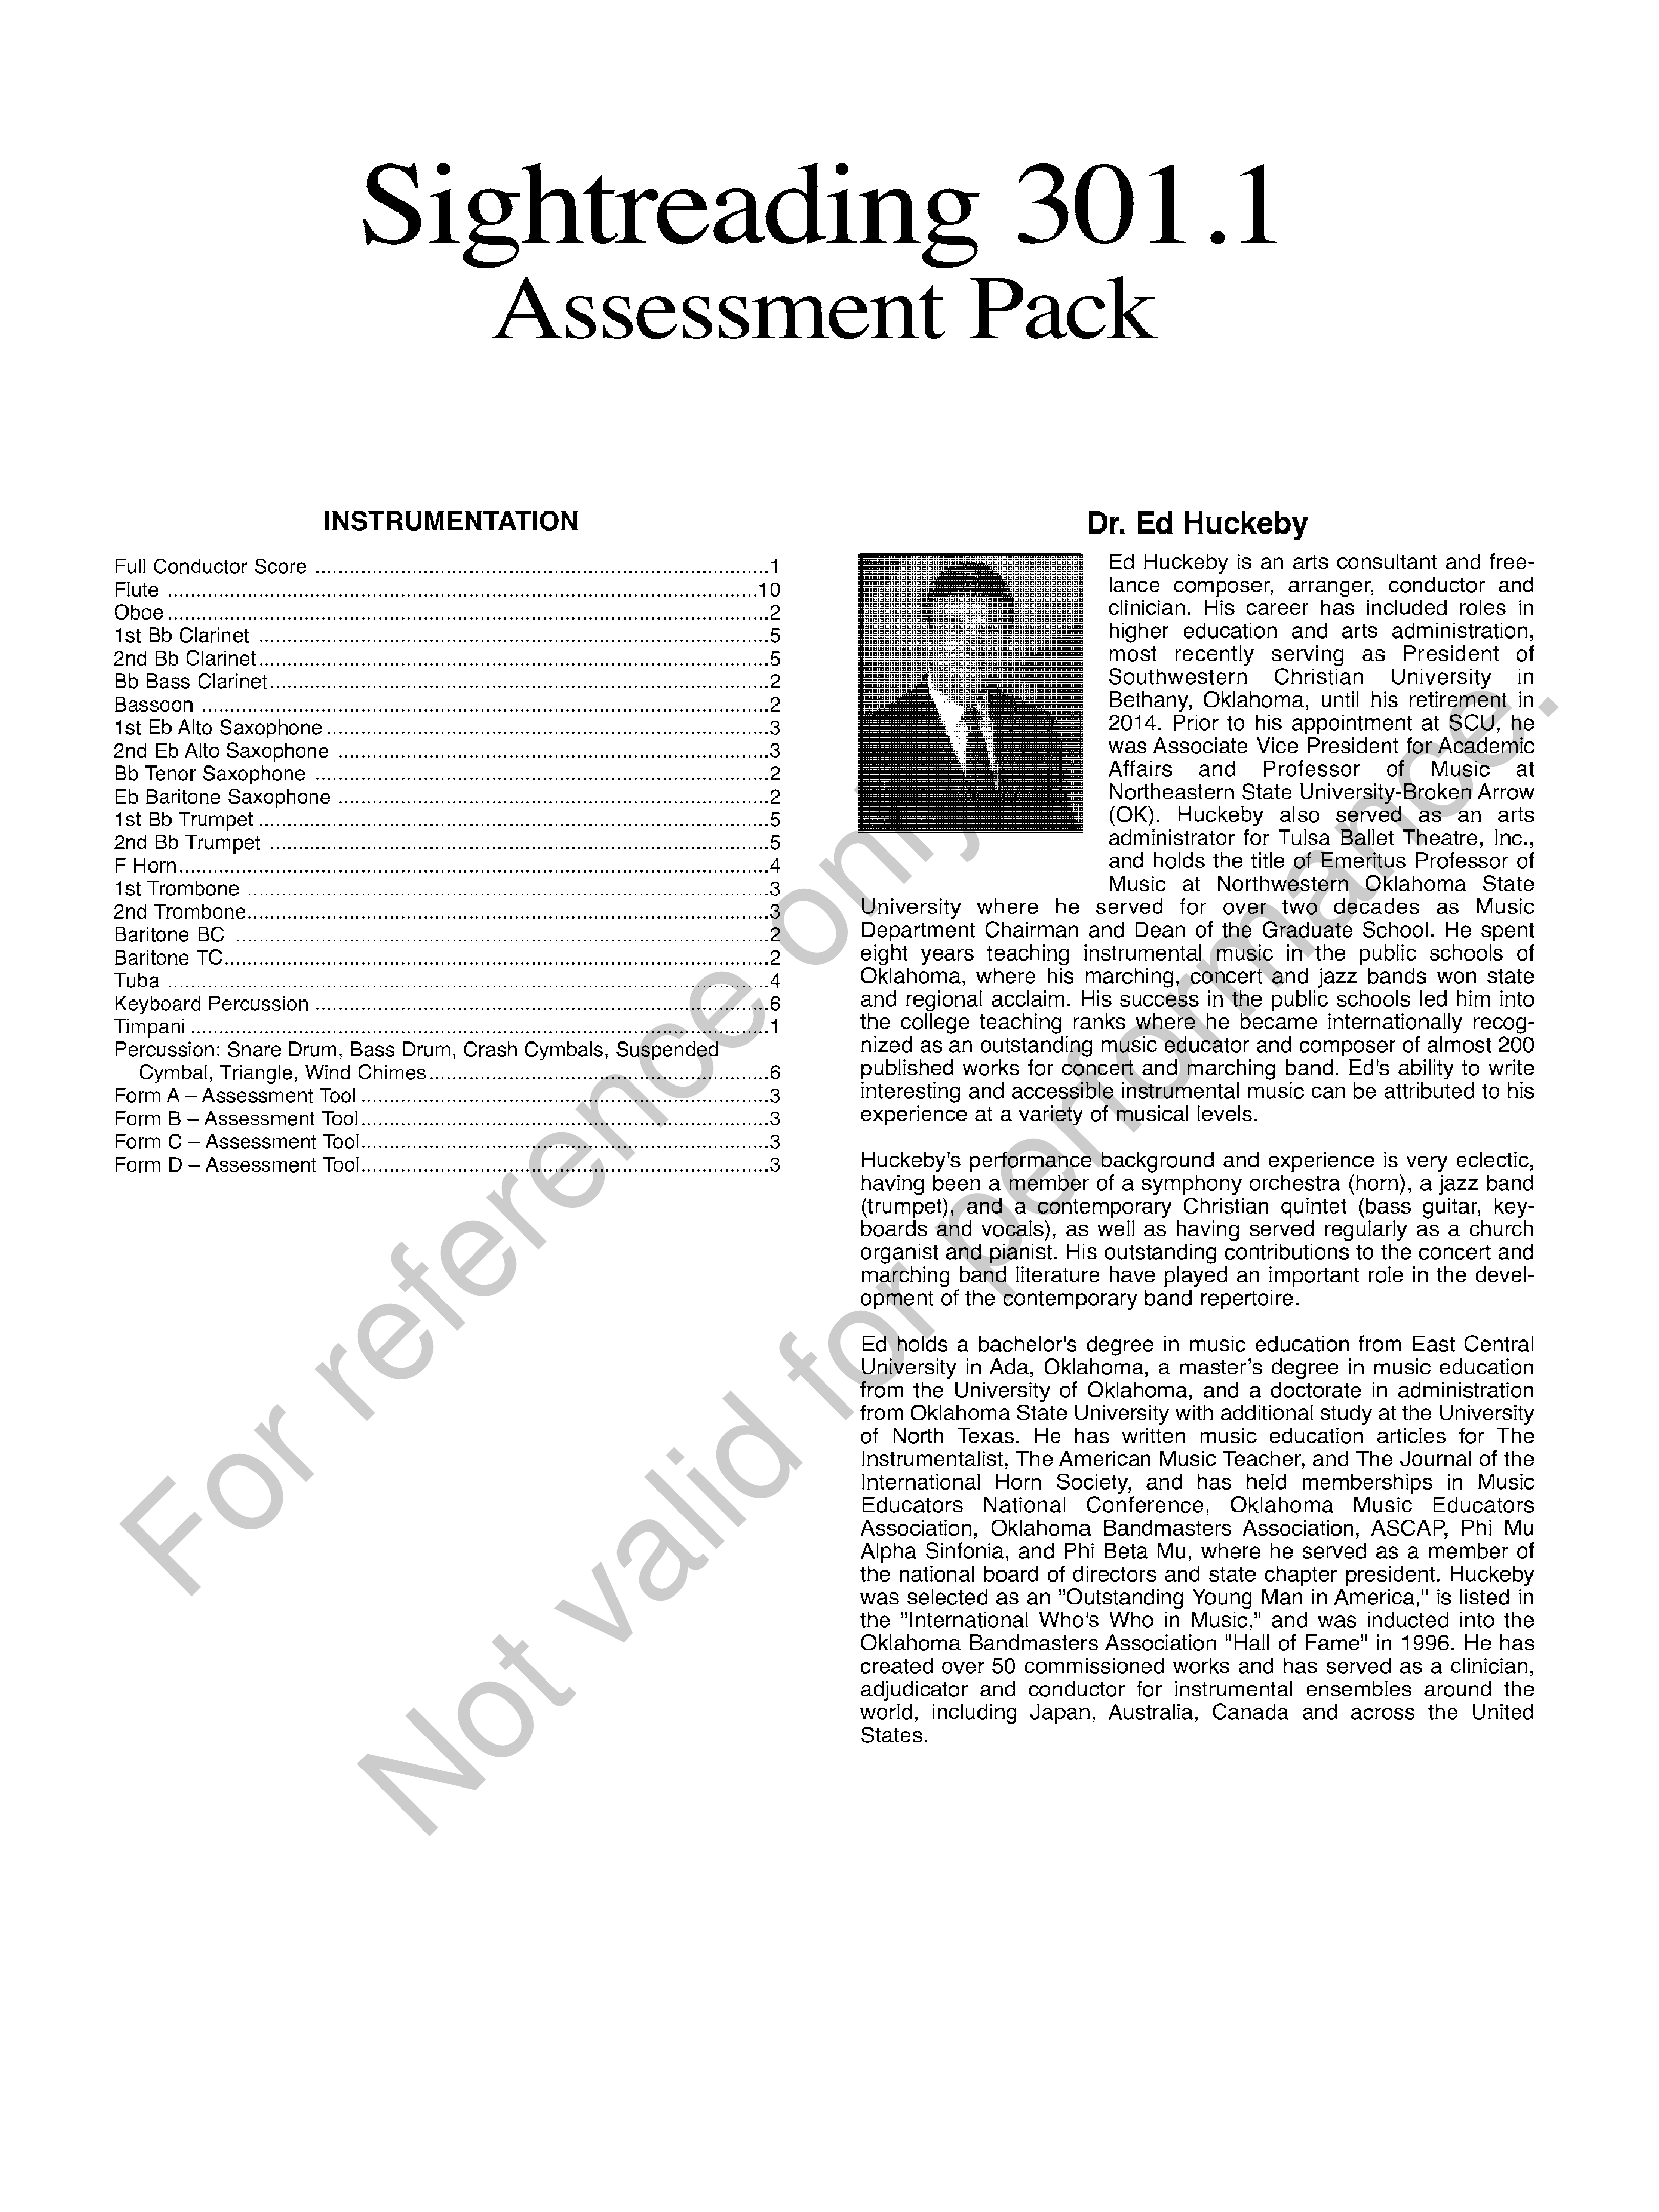 Sightreading 301 End of Instruction Assessment Pack